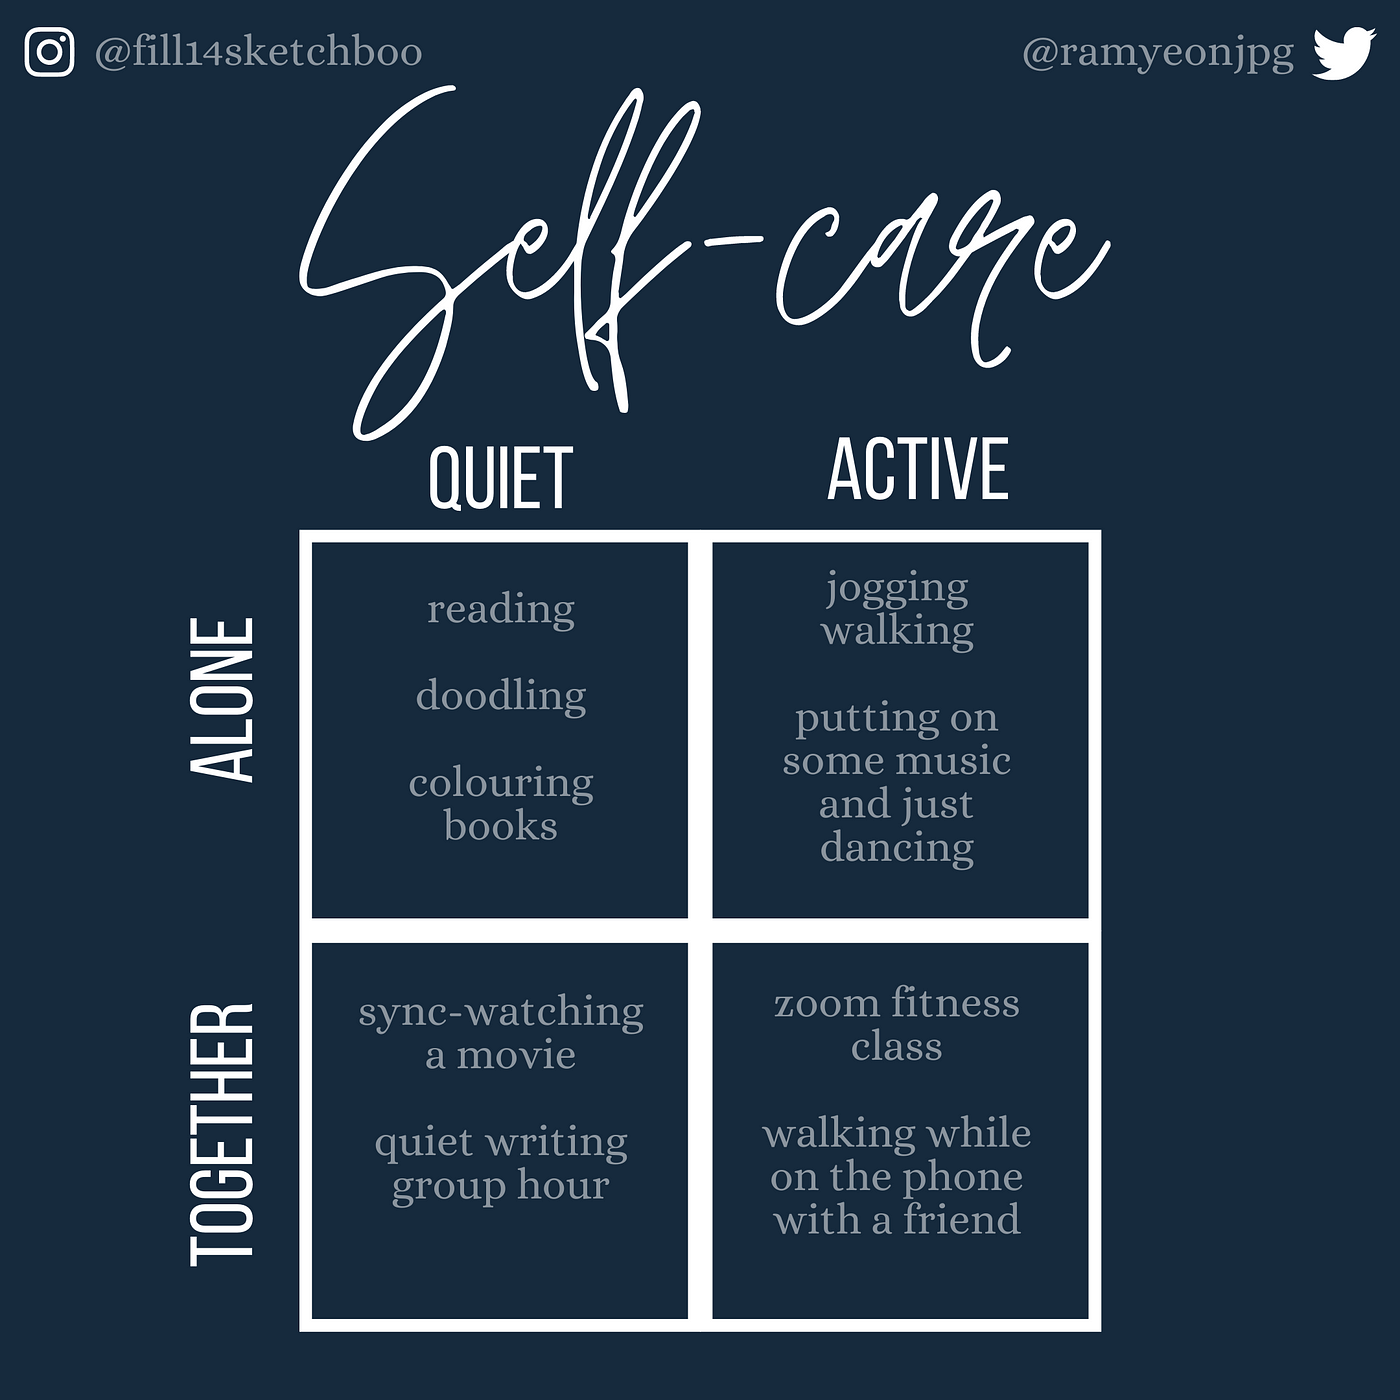 A weekly self-care/ check-in routine | by Lucy Dan 蛋小姐 (she/her/她 ...